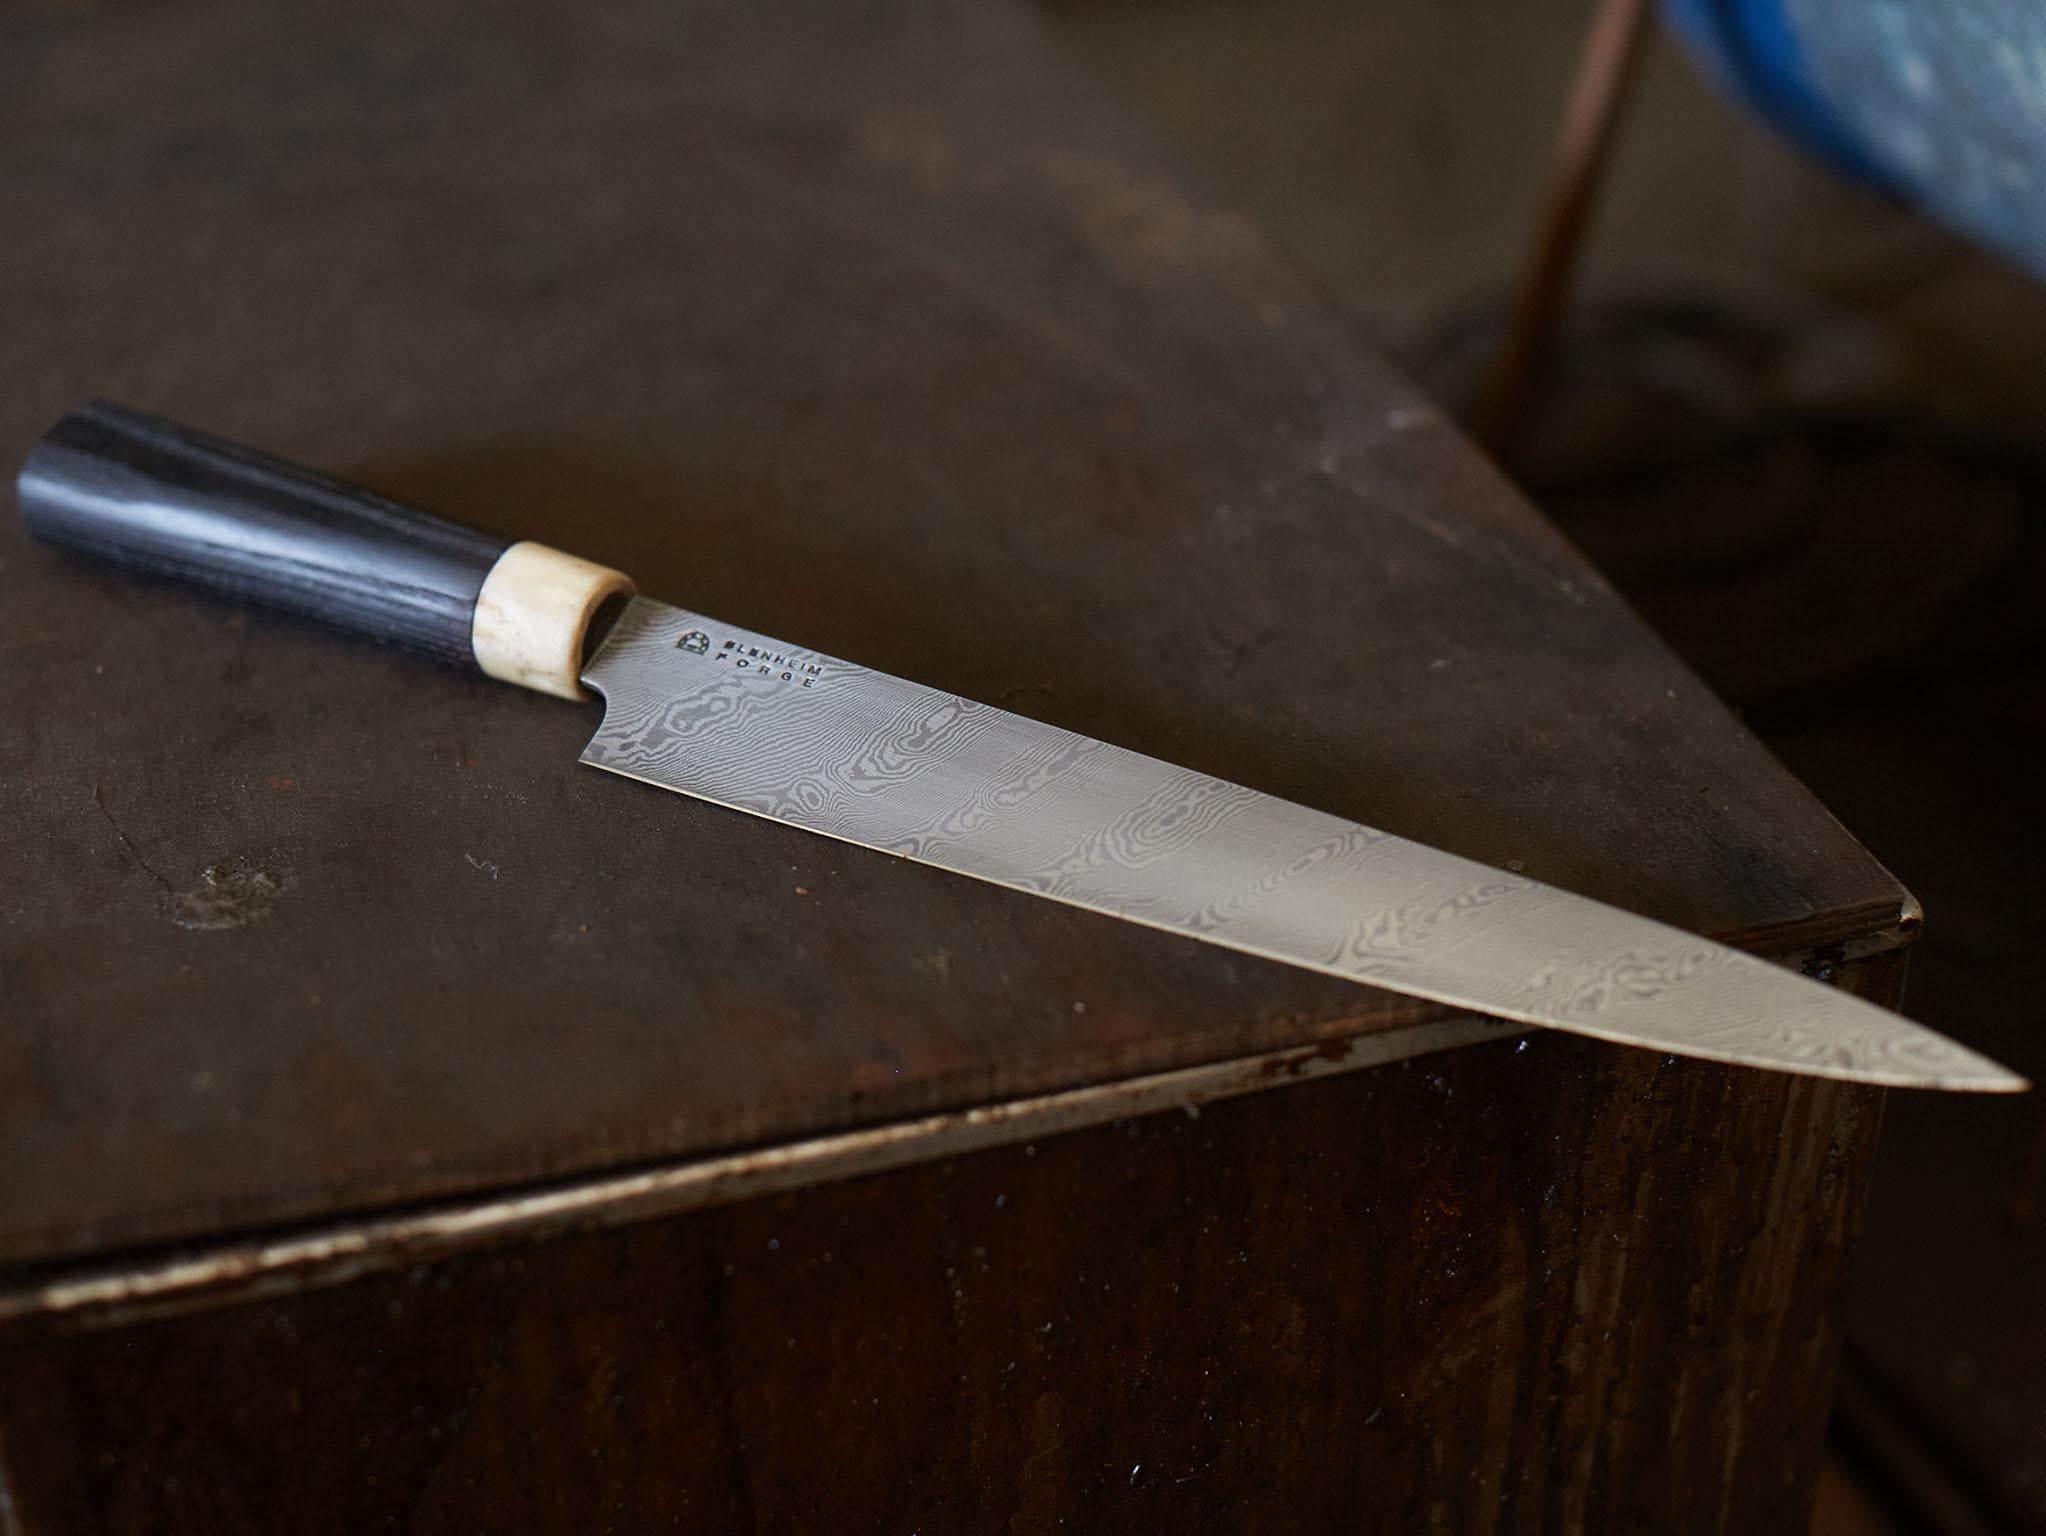 The forge carving knife from Blenheim in Peckham. Prices begin at £230, blenheimforge.co.uk